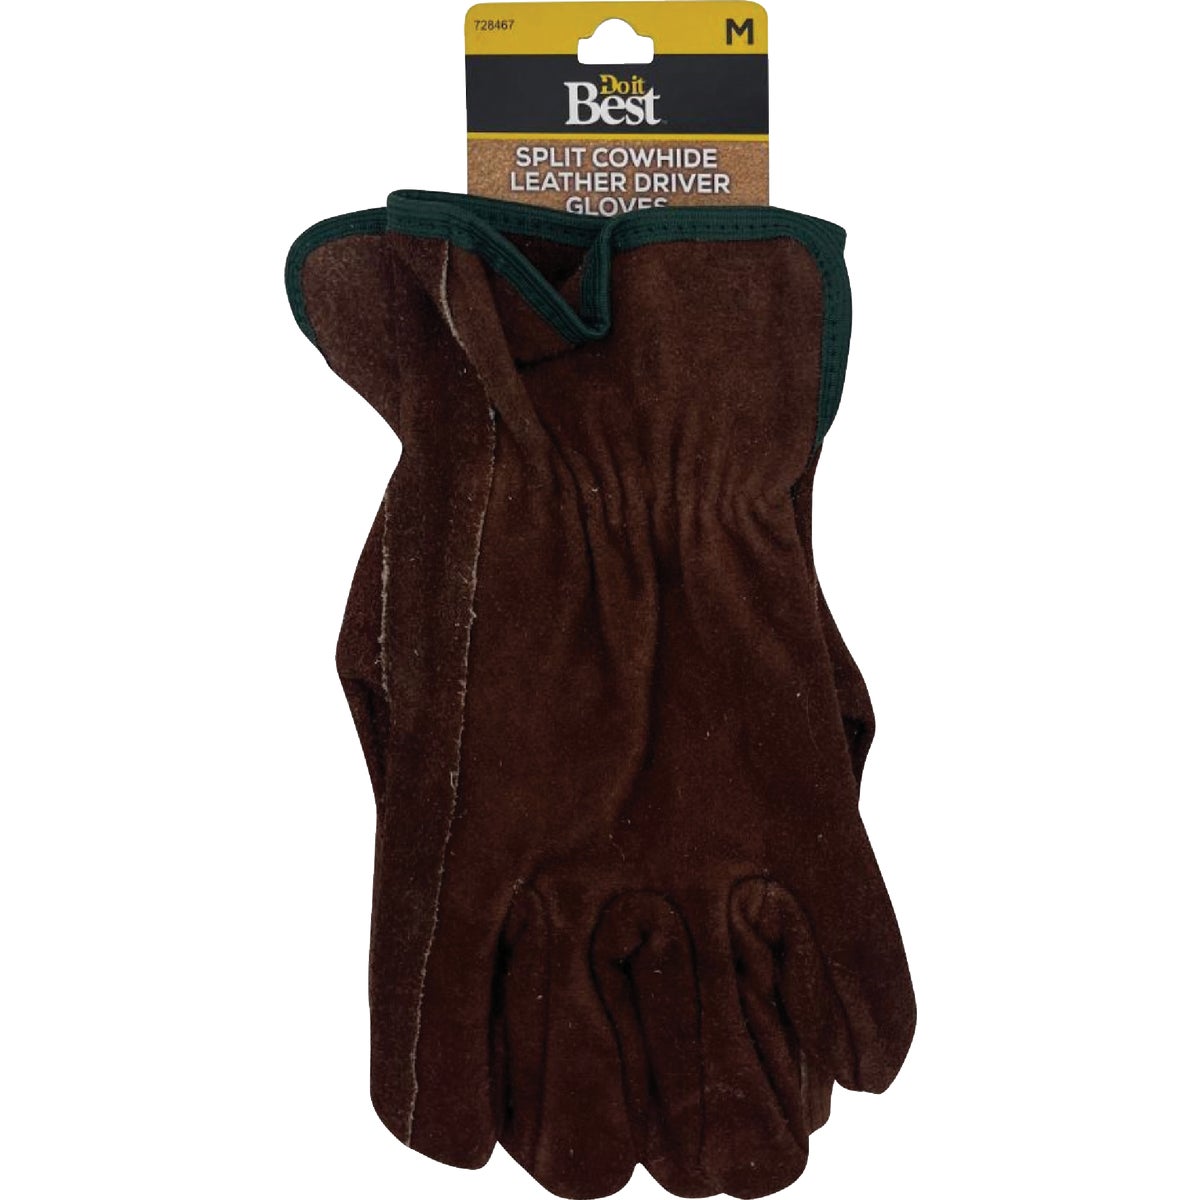 Item 728467, Full feature select suede cowhide glove with keystone thumb, gunn cut, self